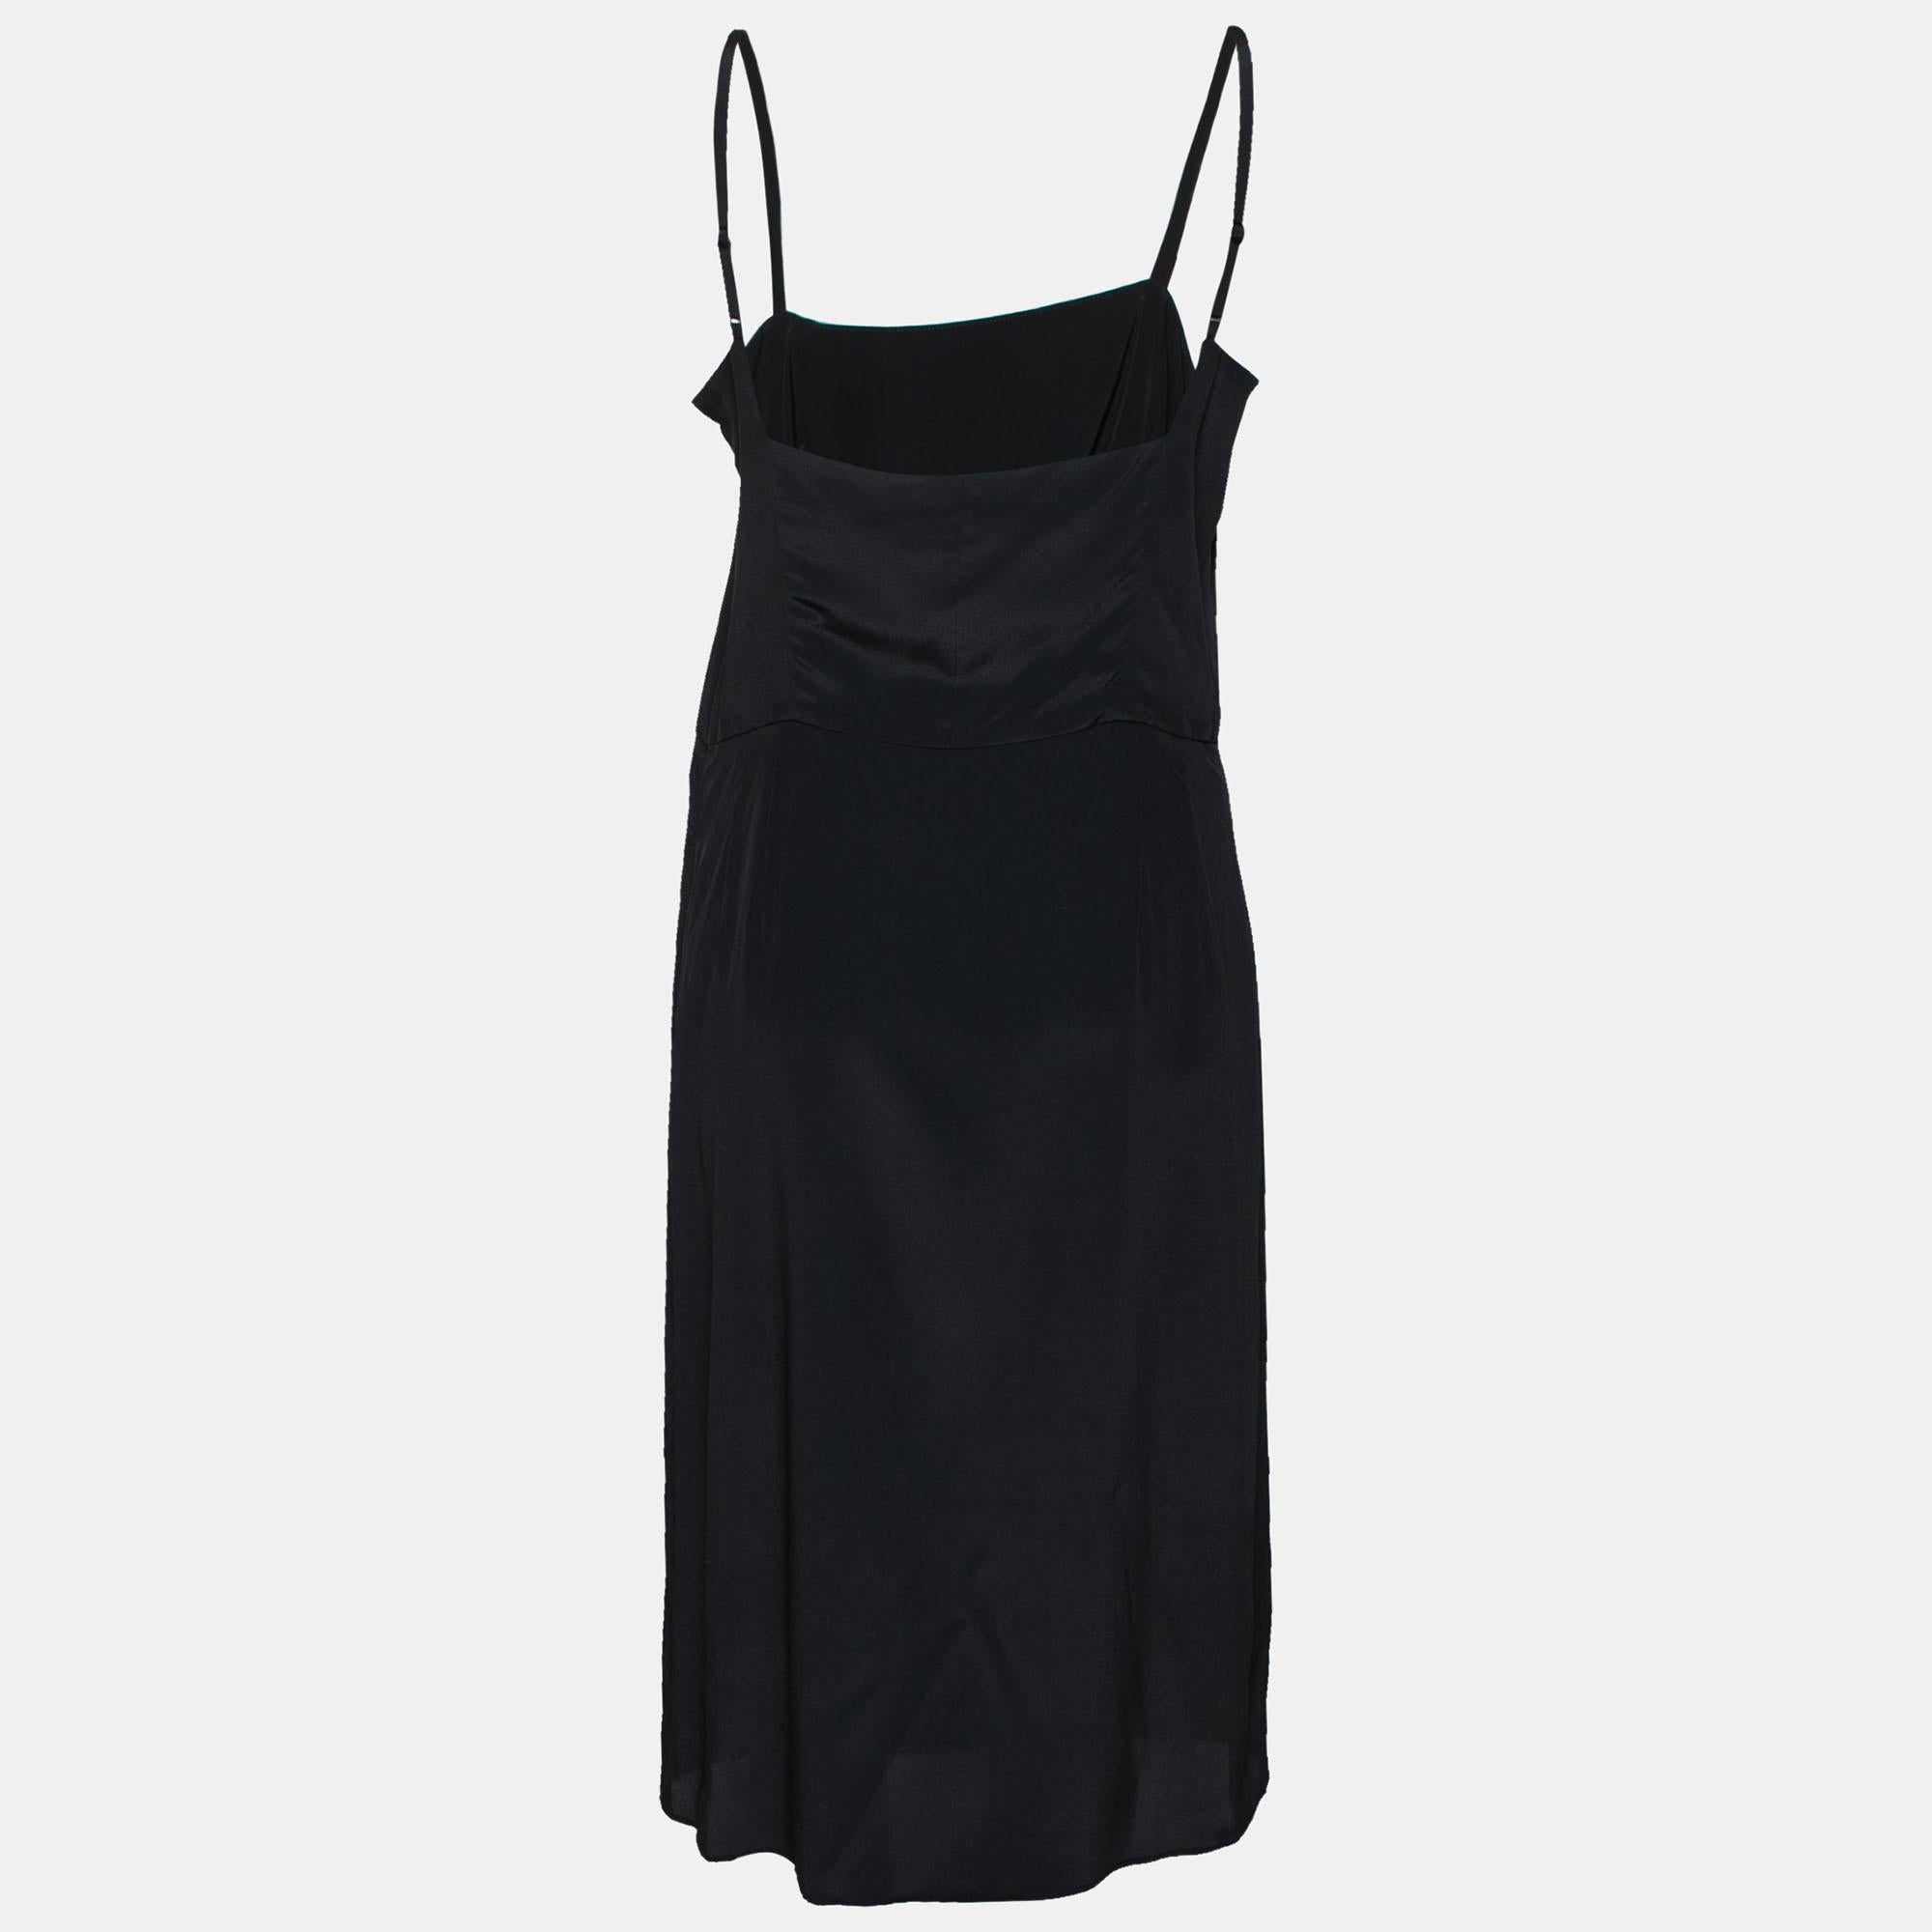 Sport a comfy and chic style as you wear this slip dress from the House of Balenciaga. Tailored from black crepe fabric, this dress is highlighted with slim and adjustable shoulder straps. It is provided with a zipper for fastening. Match this cute